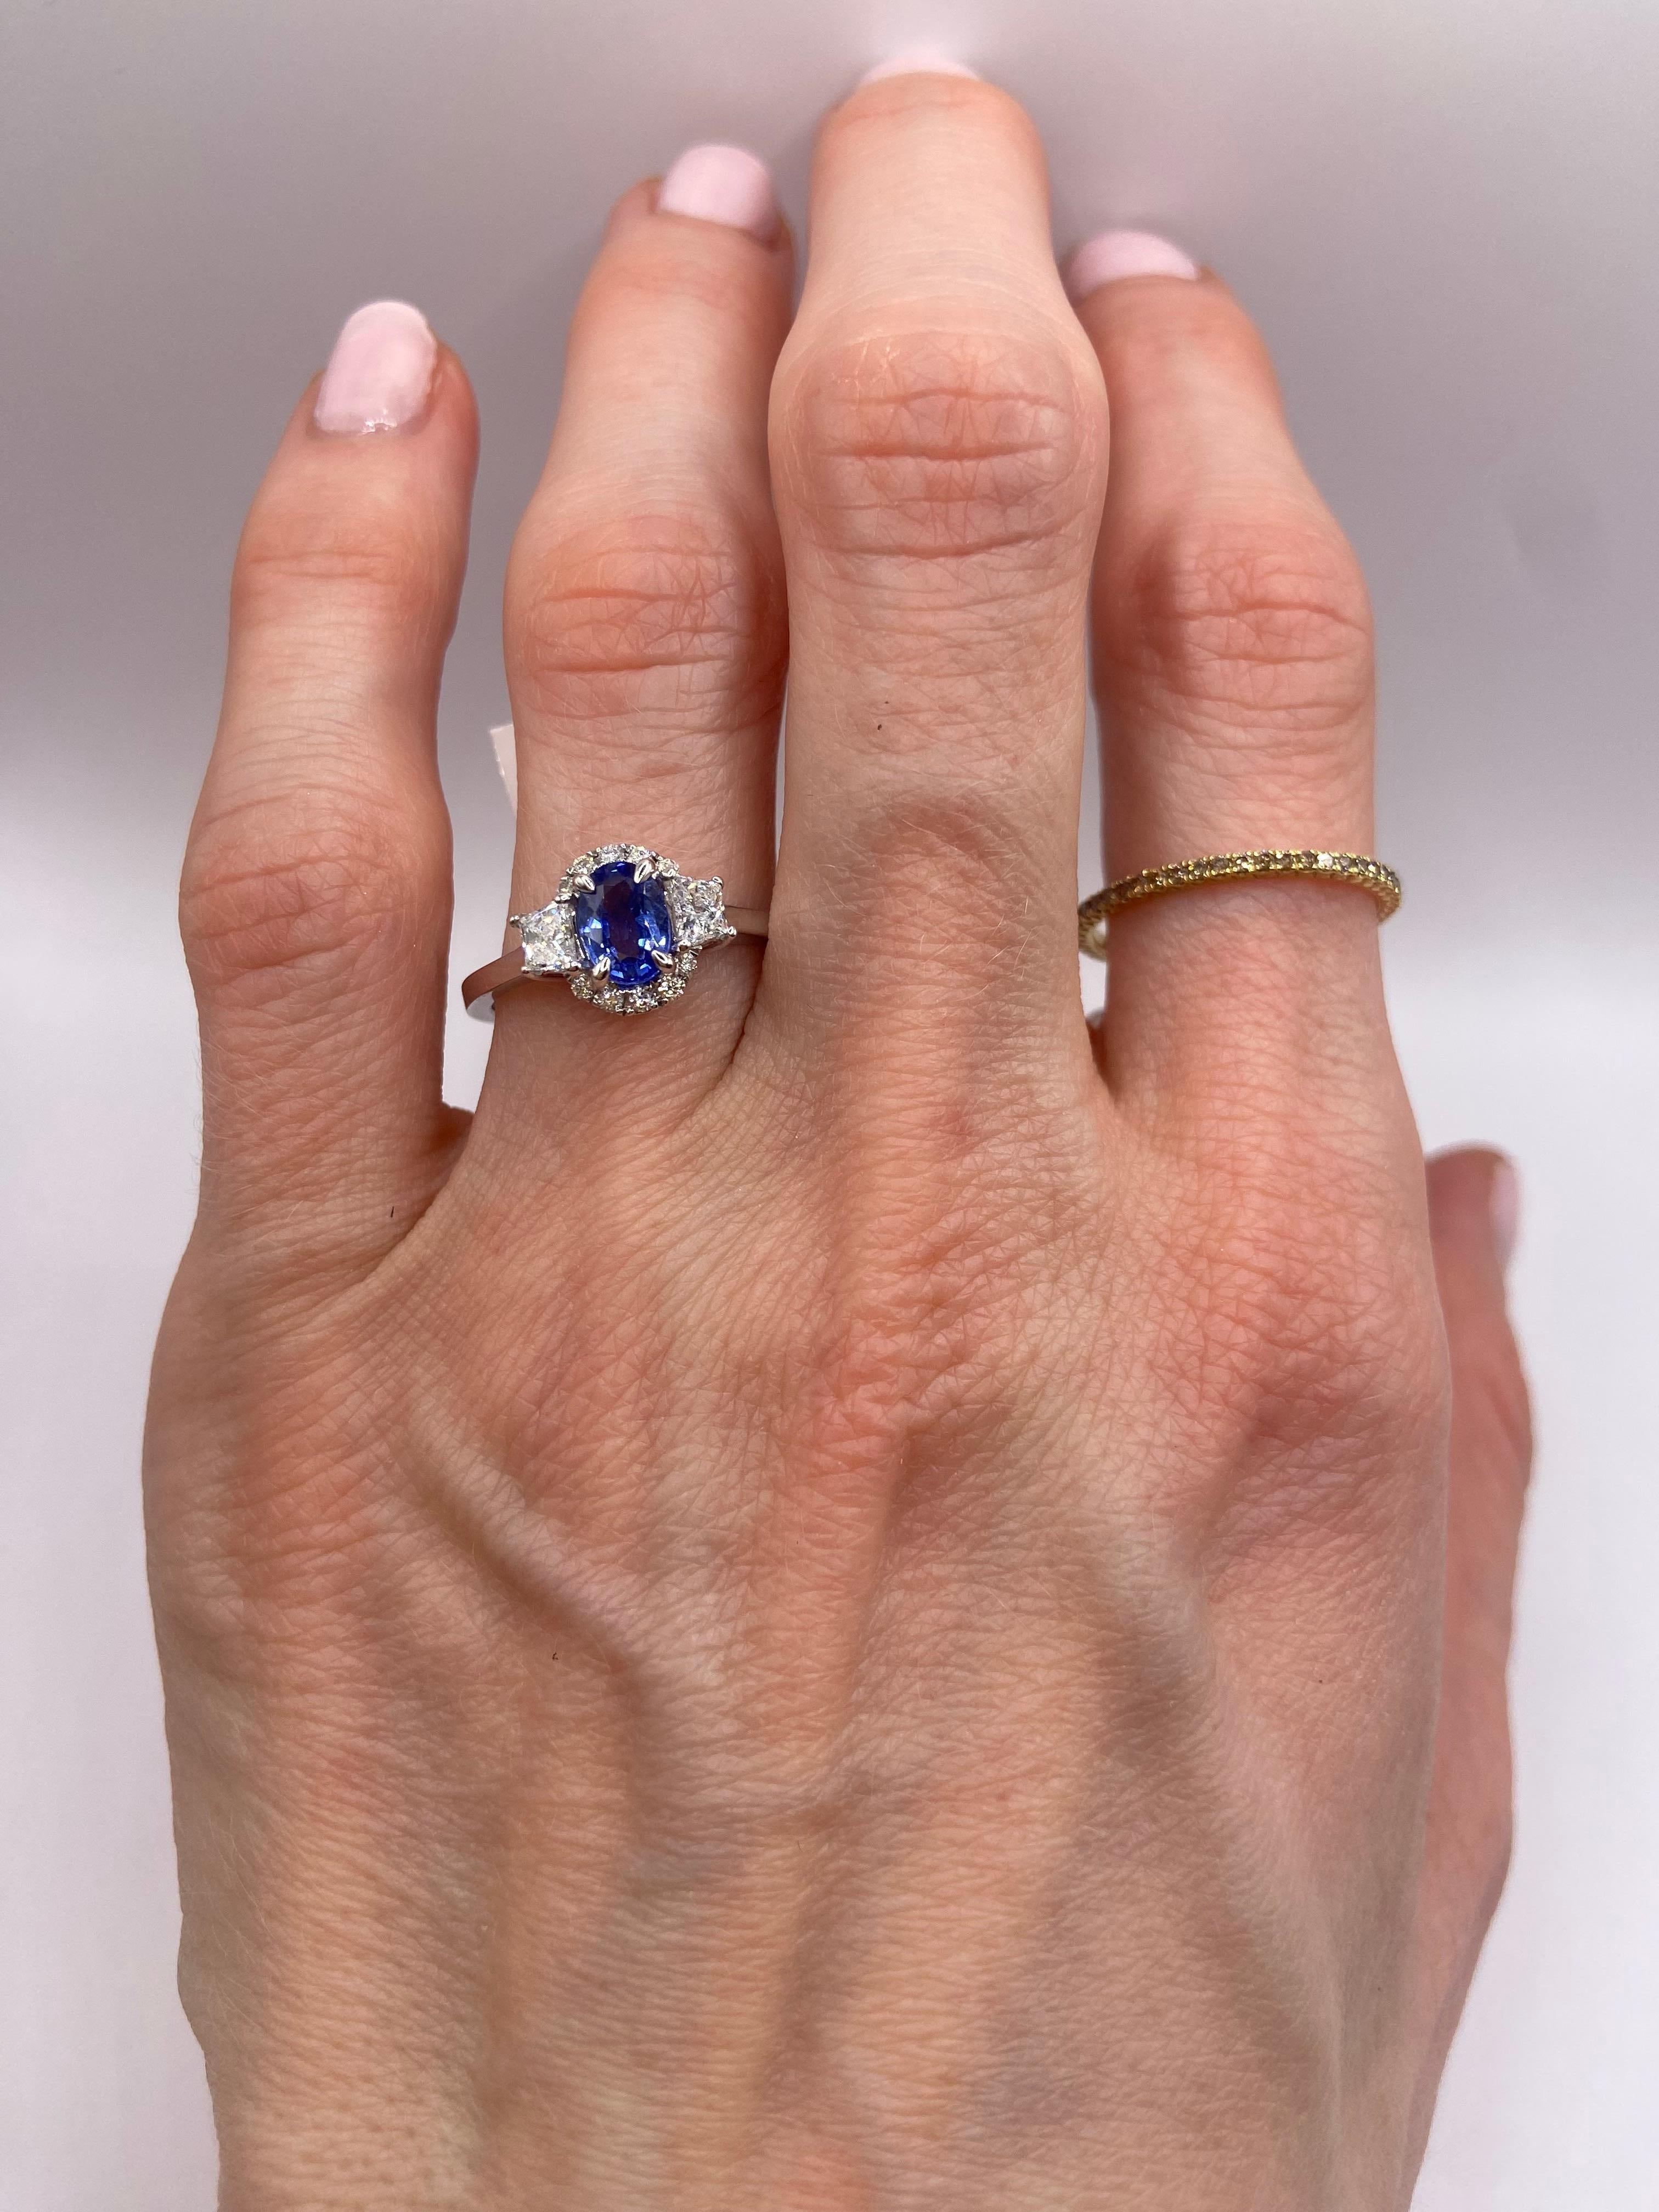 Metal: 18KT White Gold
Size: 6.5
(Ring is size 6.5 but is sizable upon request)

Number of Oval Sapphires: 1
Carat Weight: 0.78ctw
Stone Size: 6.5 x 4.5mm

Number of Trapezoid Diamonds: 2
Carat Weight: 0.35ctw

Number of Round Diamonds: 10
Carat